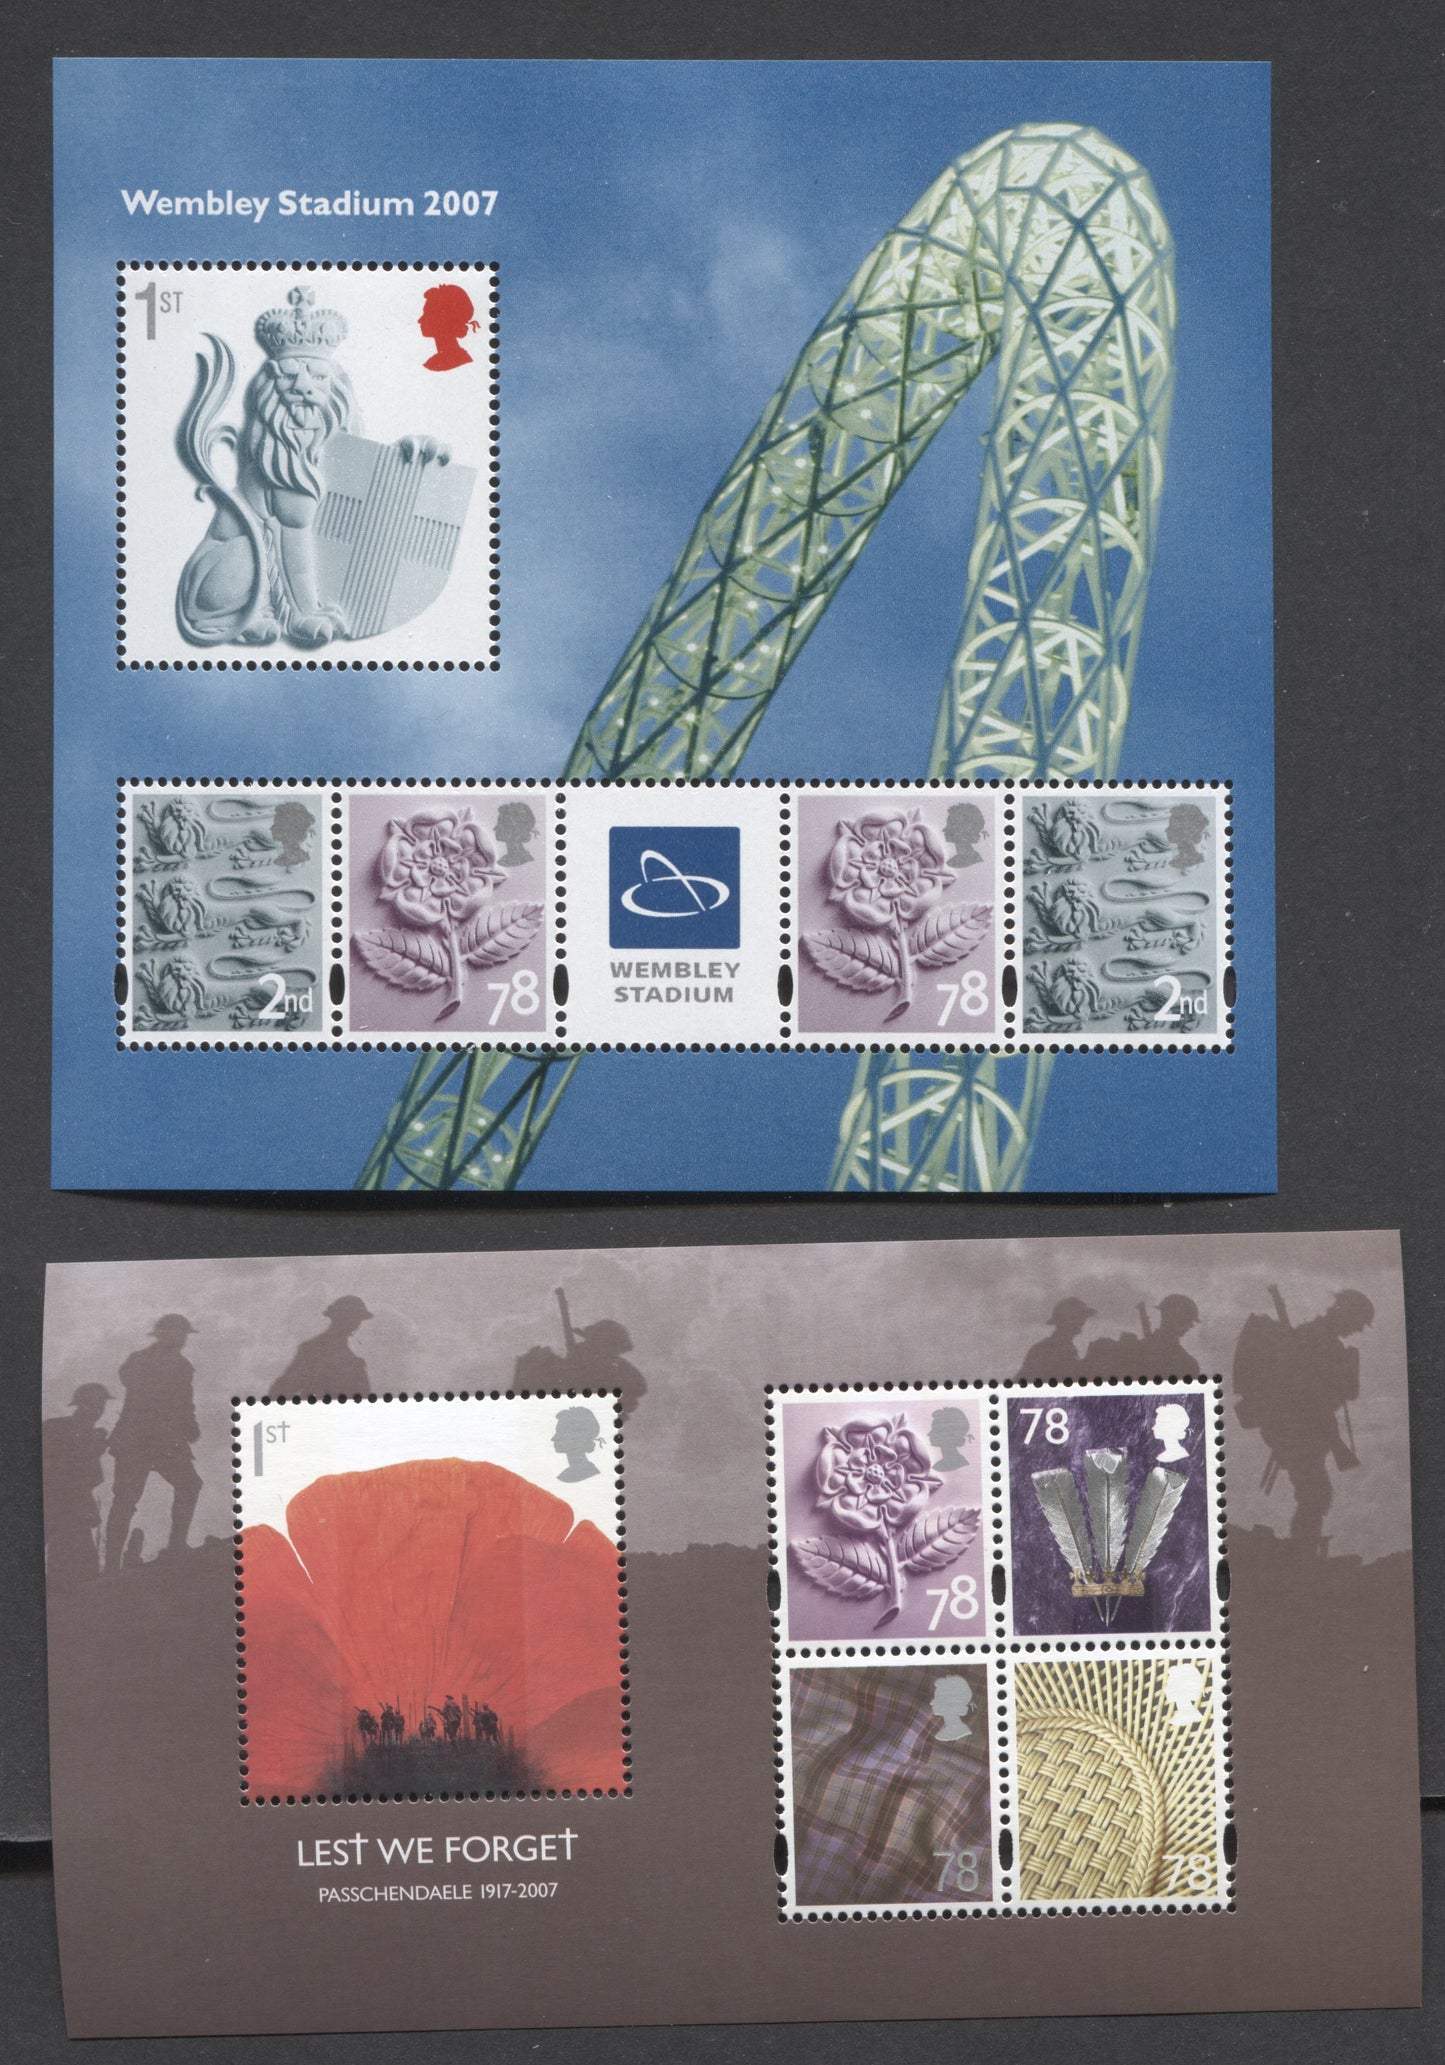 Lot 369 Great Britain SG#MS2740 & MS2796 2007 Wembley Stadium and Passchendale Souvenir Sheets, VFNH Examples, Converted SG Concise $17.75